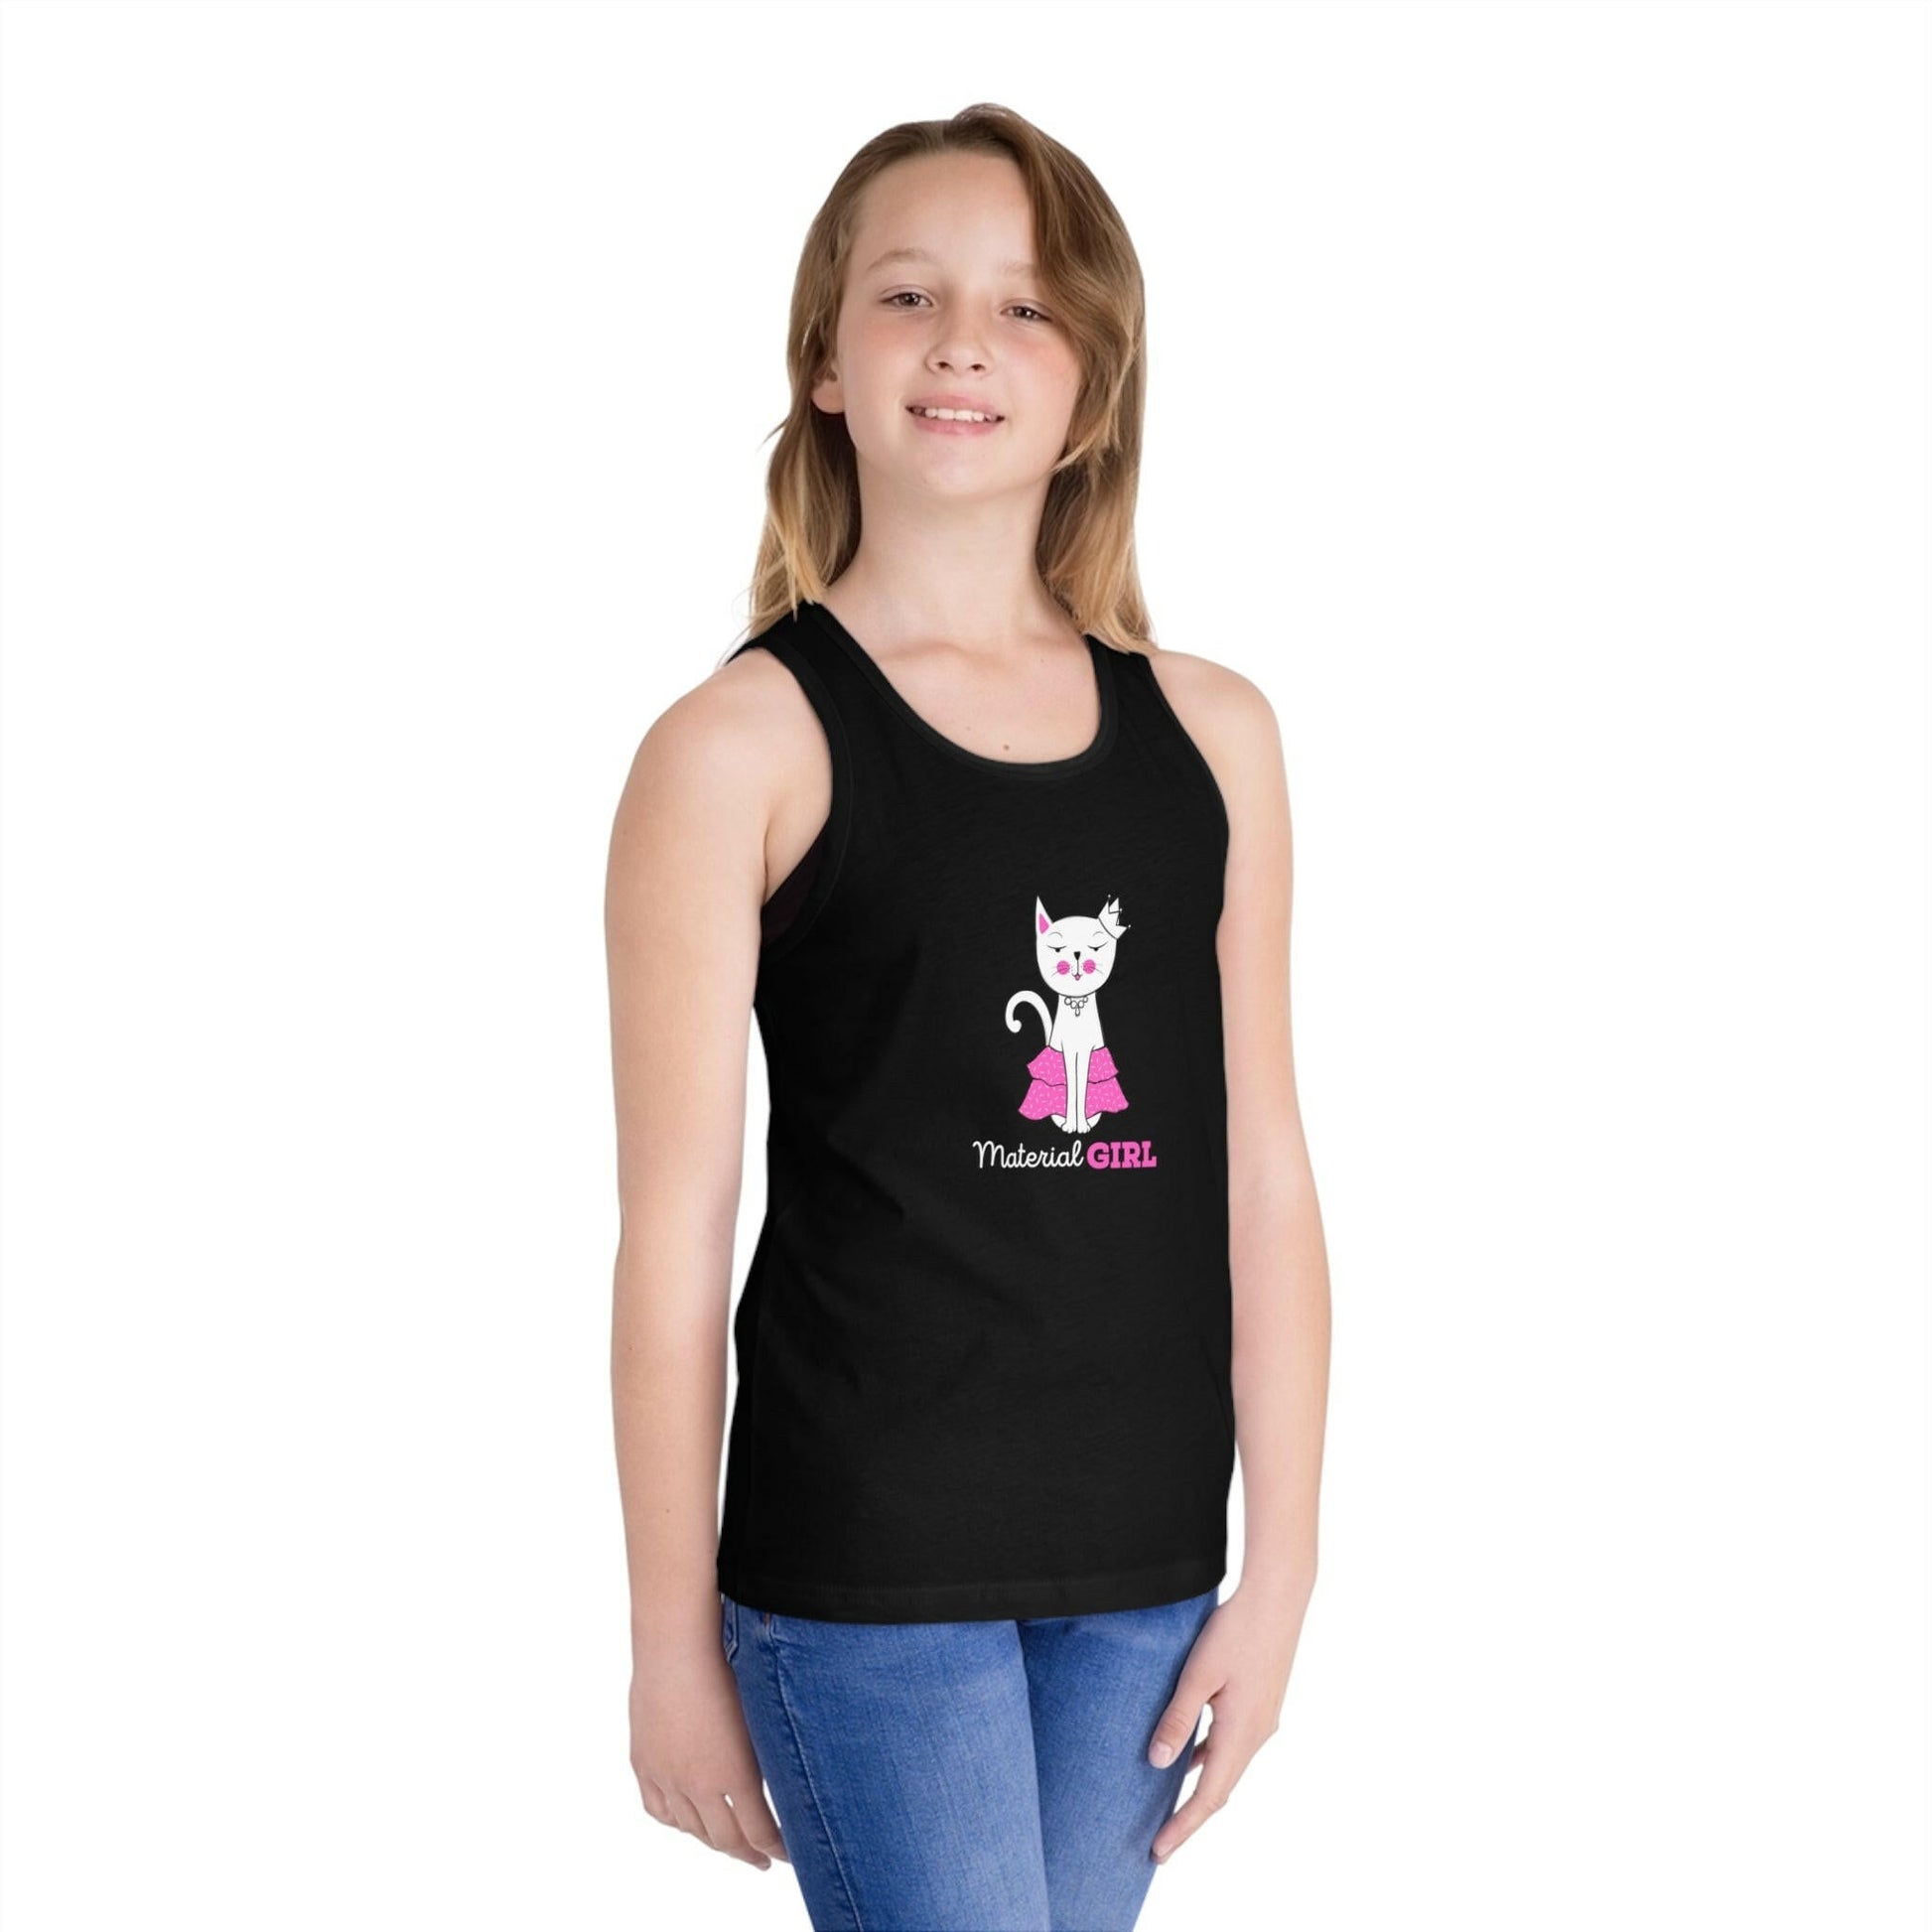 Material Girl Kid's Jersey Tank Top - Kids clothes - Epileptic Al’s Shop